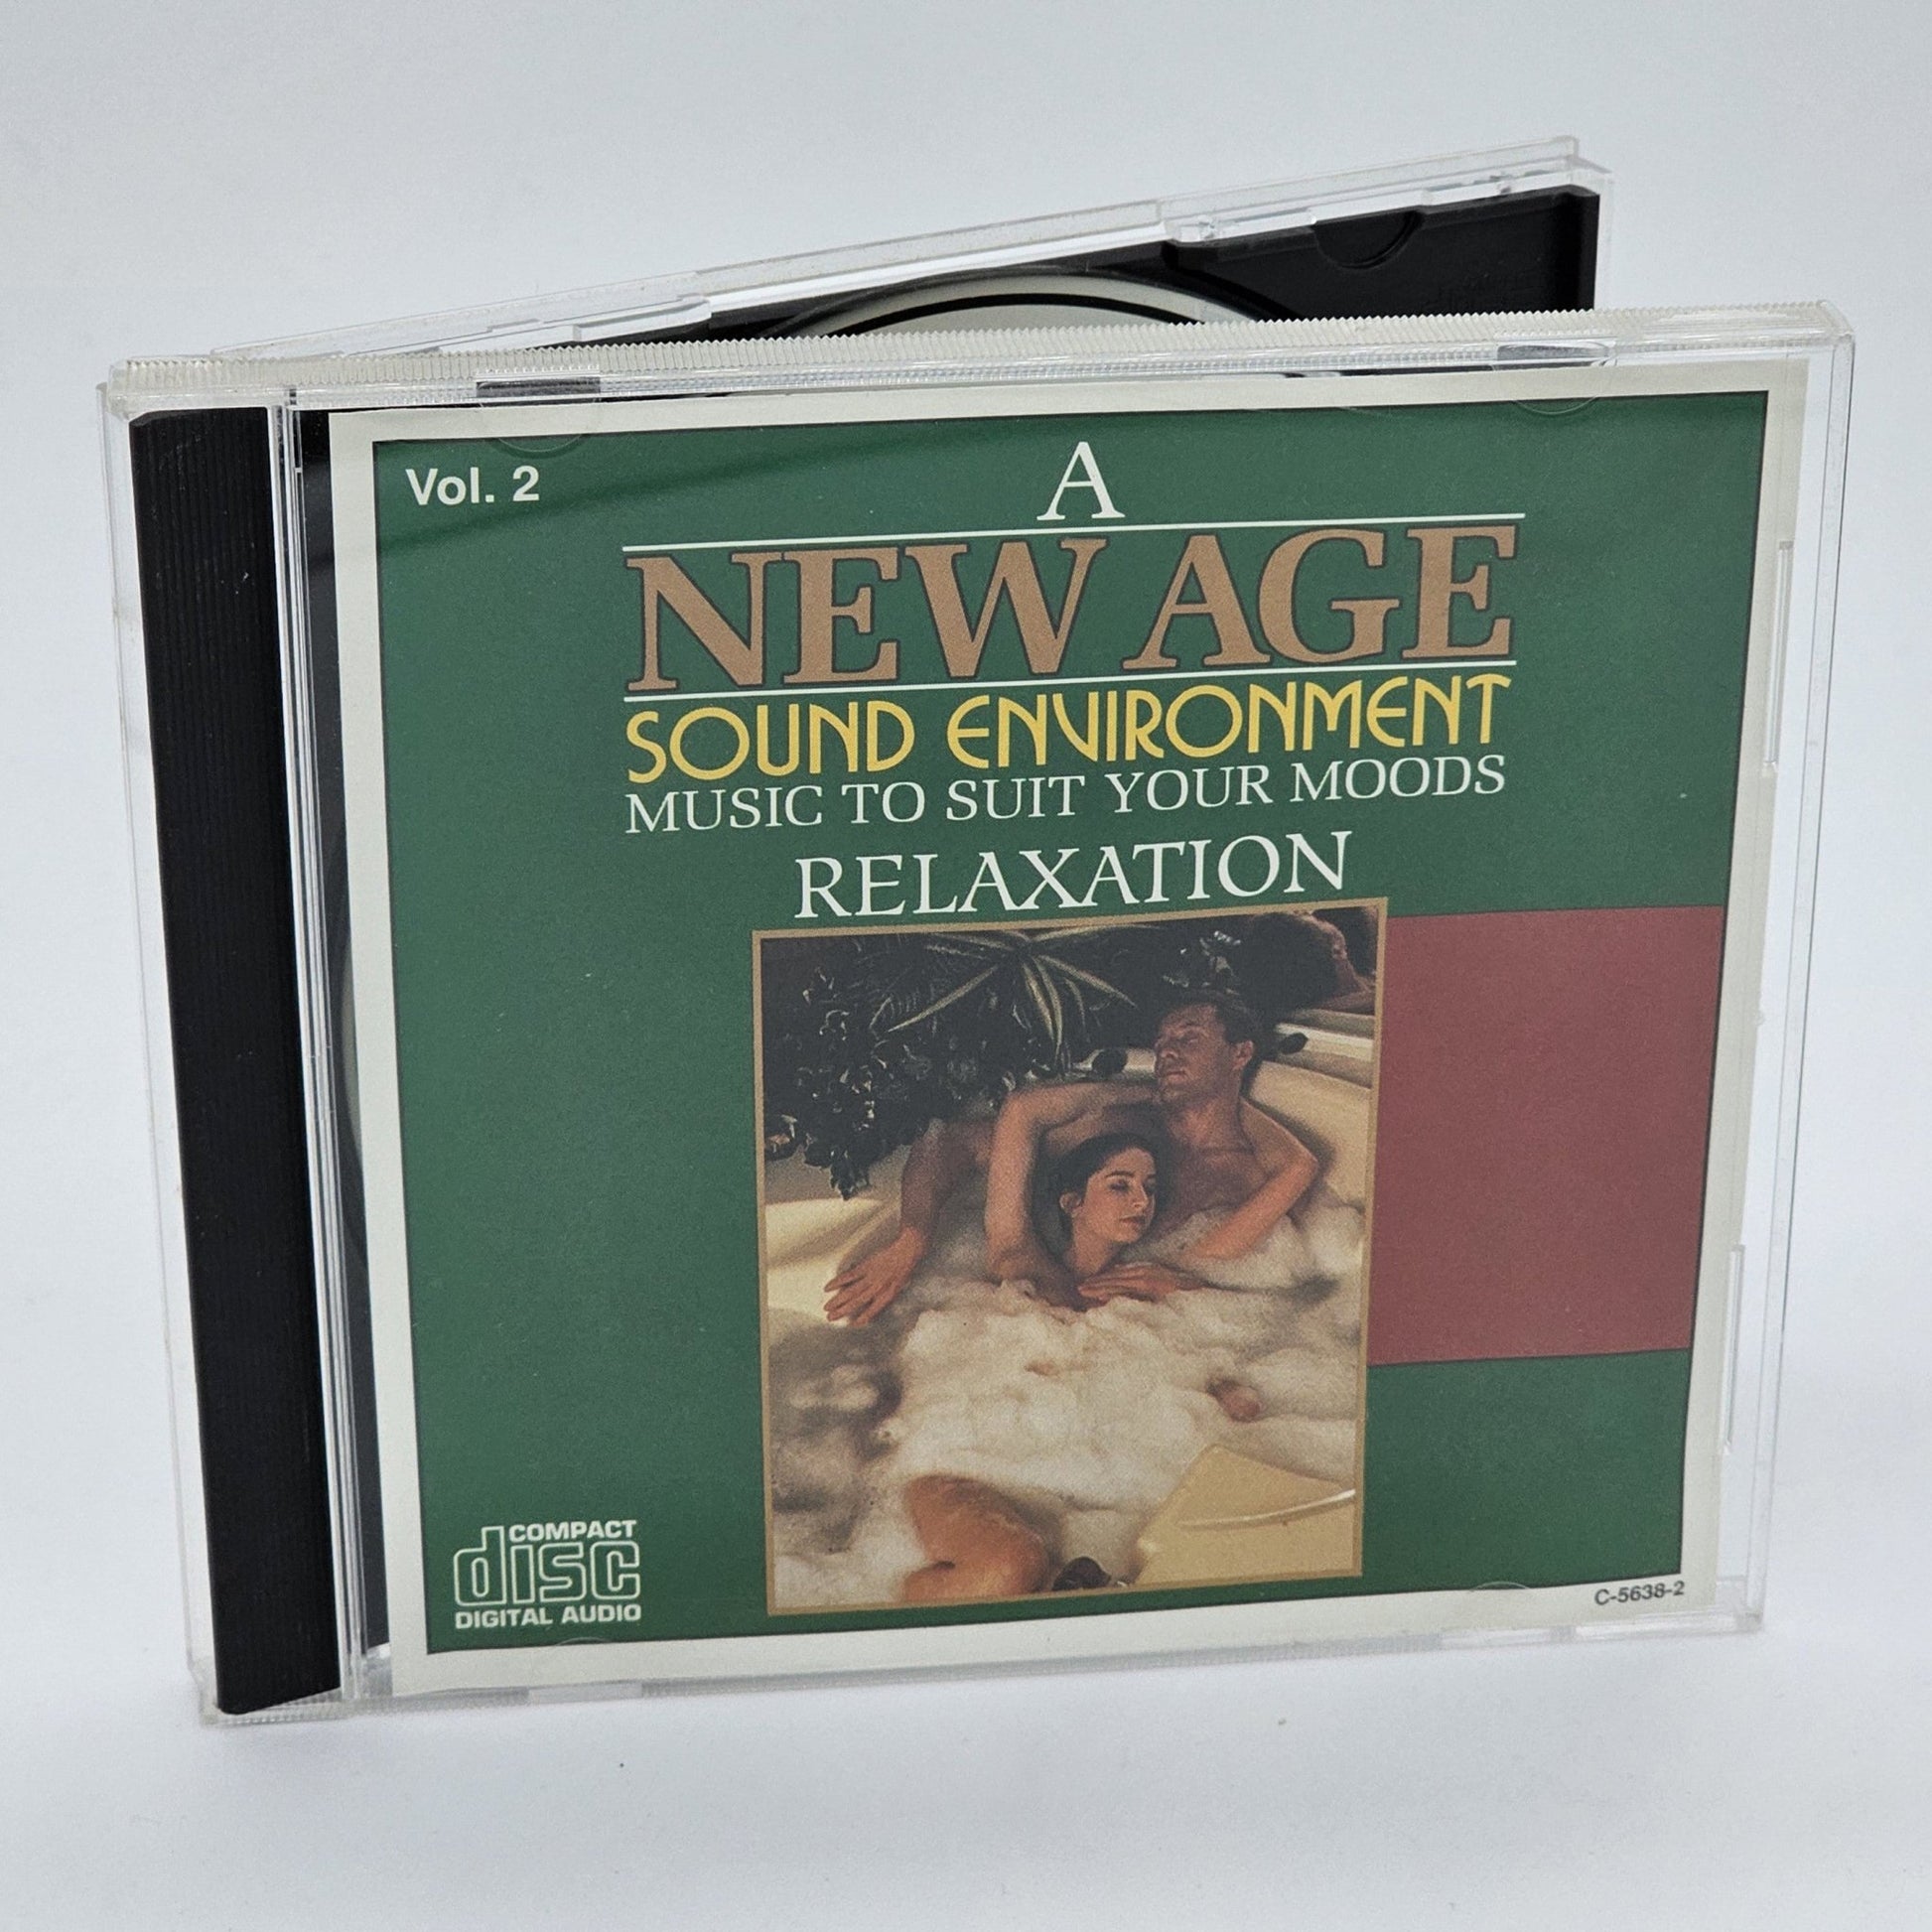 Madacy Entertainement - New Age Sound Environment | Music To Suit Your Moods | 4 CD Set - Compact Disc - Steady Bunny Shop